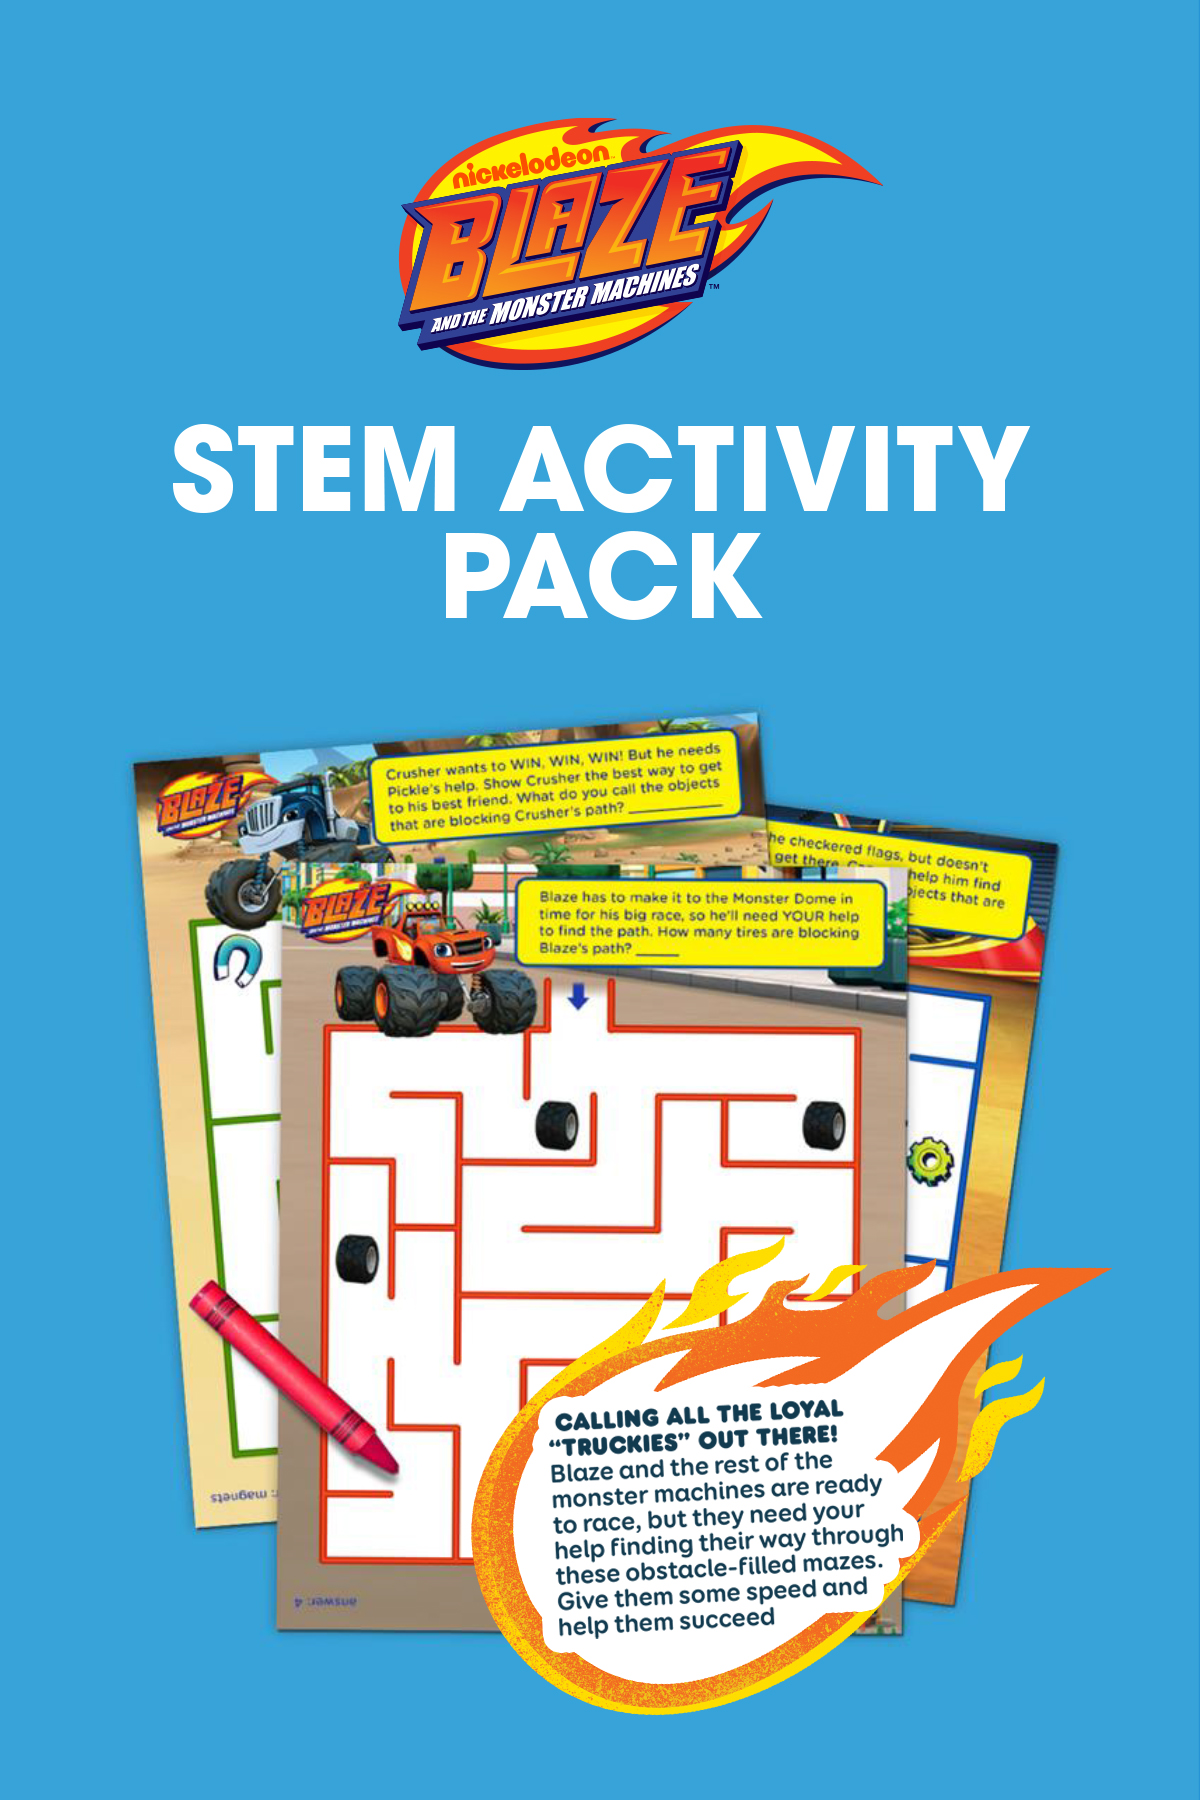 Download Rev Those Engines for a Blaze Maze Activity Pack! | Nickelodeon Parents